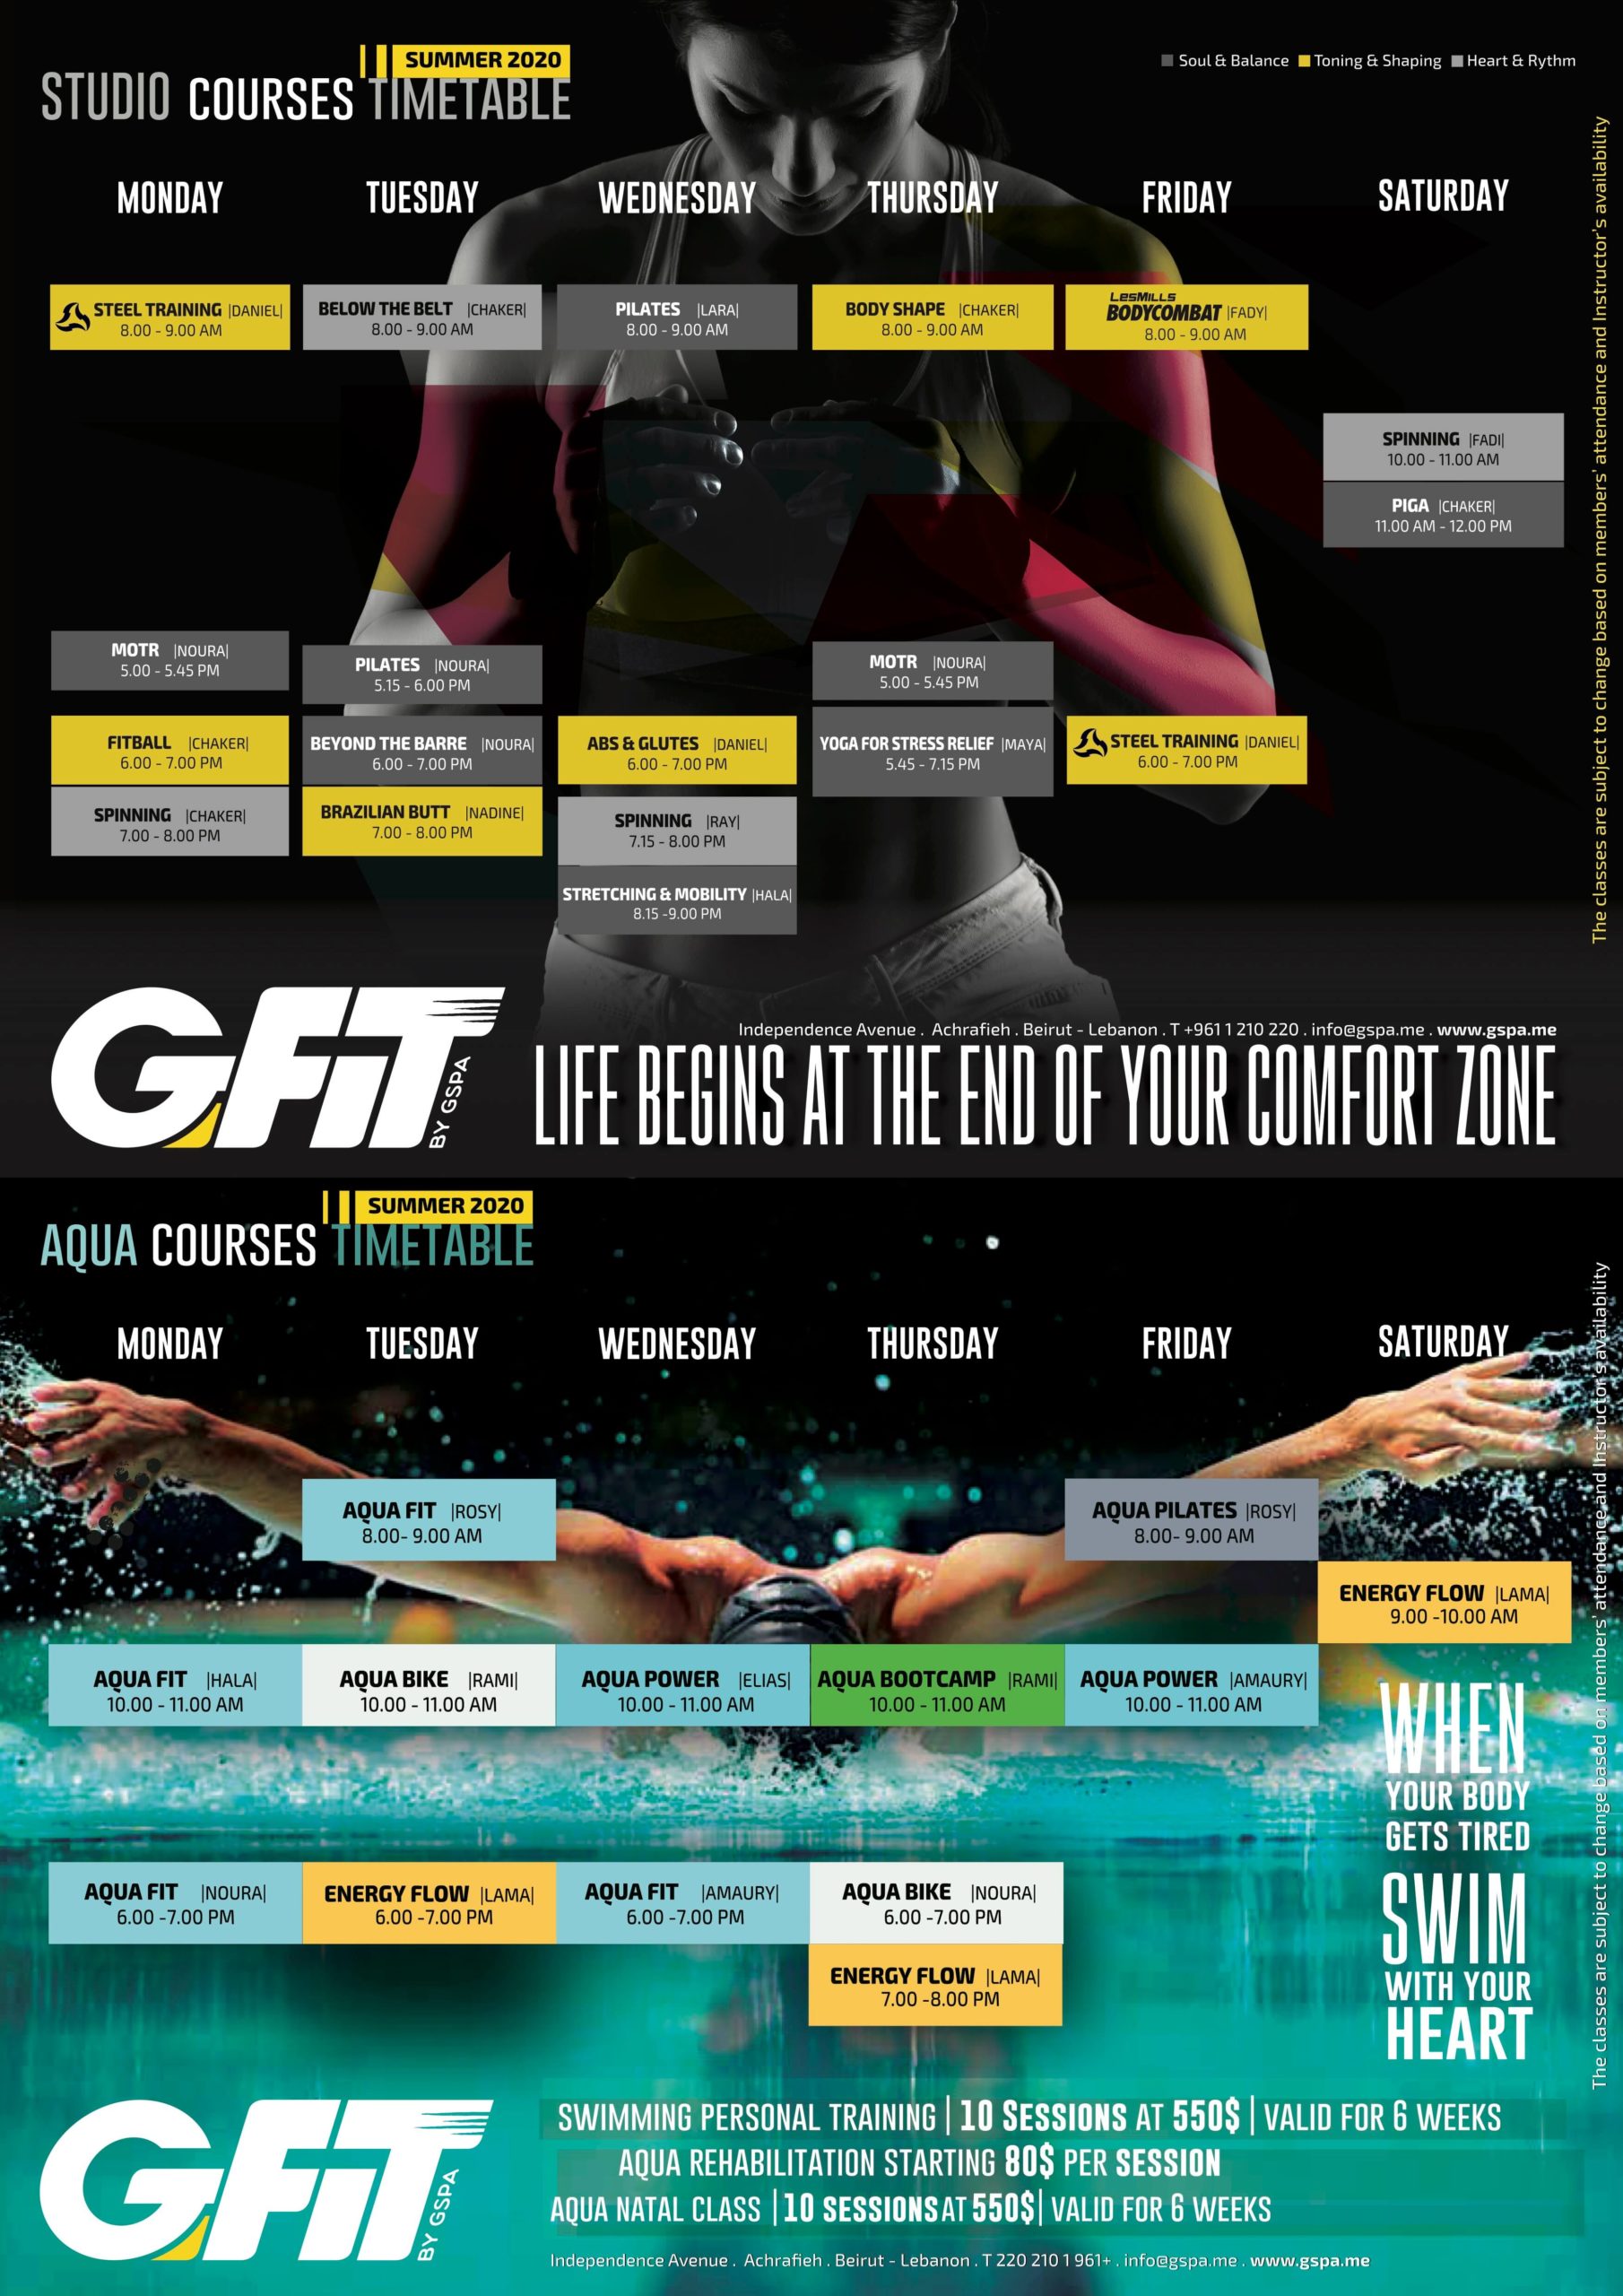 G fit gym classes schedule summer 2020 photo